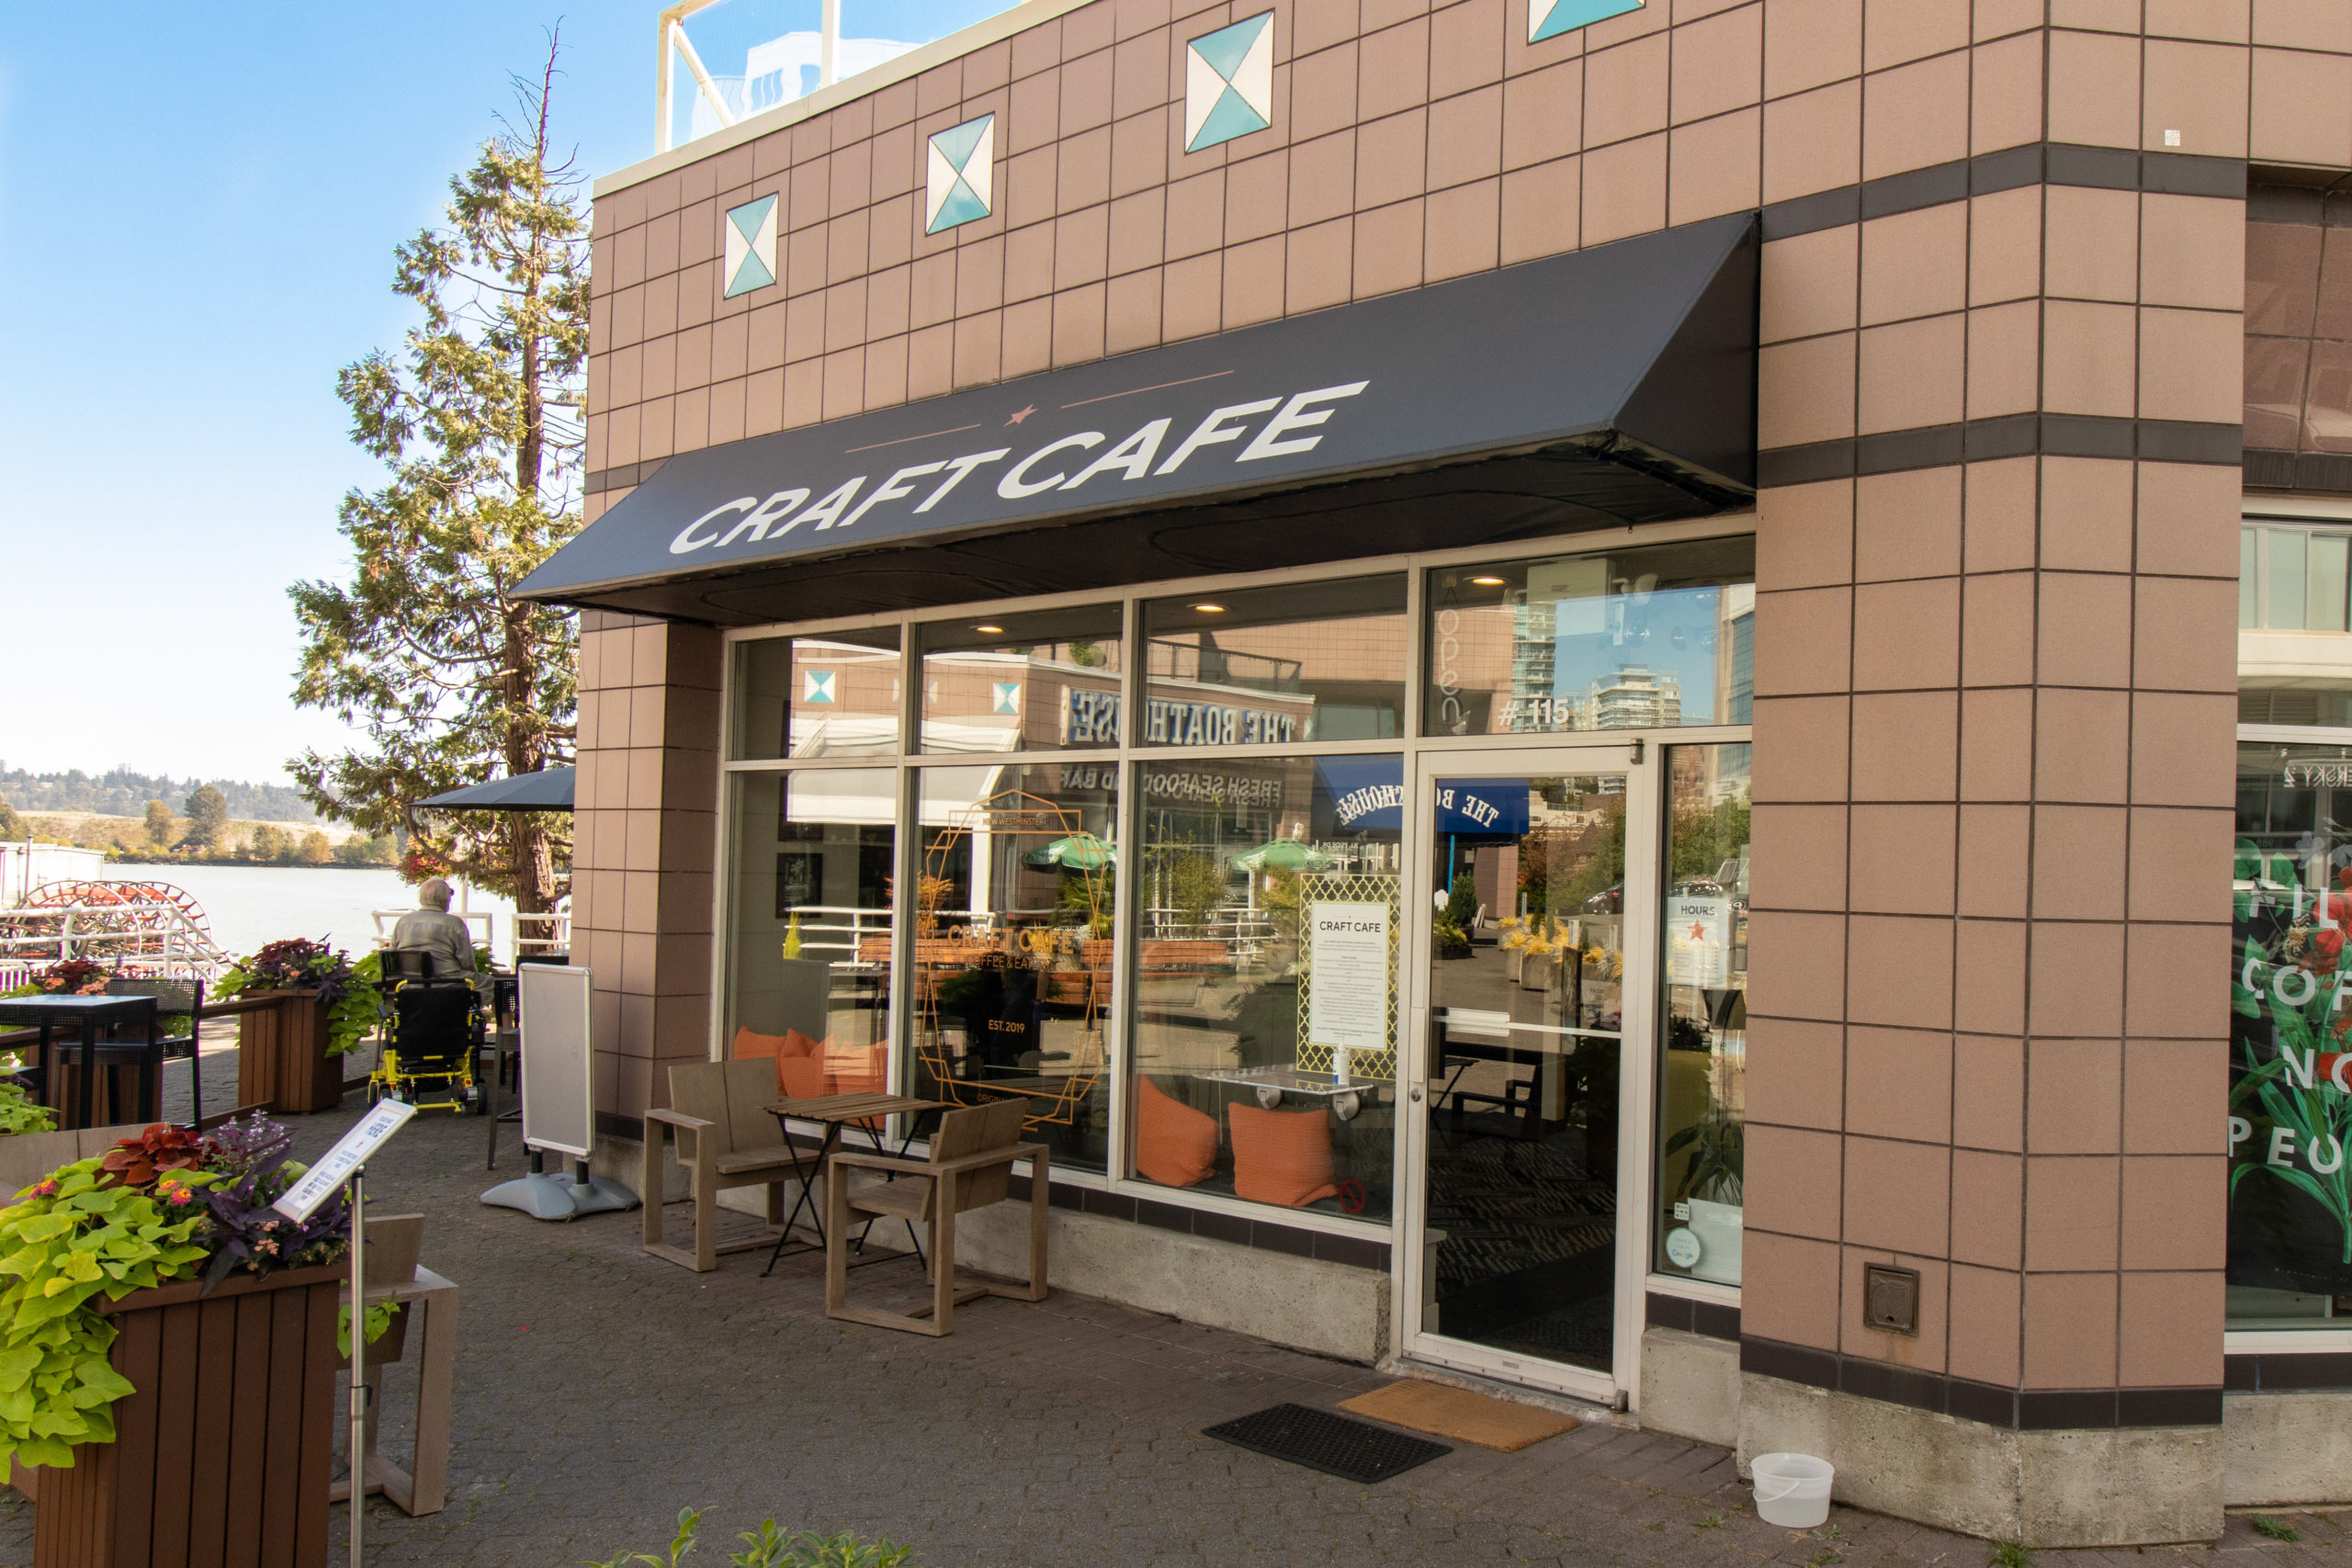 Craft Cafe: Is this the best coffee shop in New Westminster?